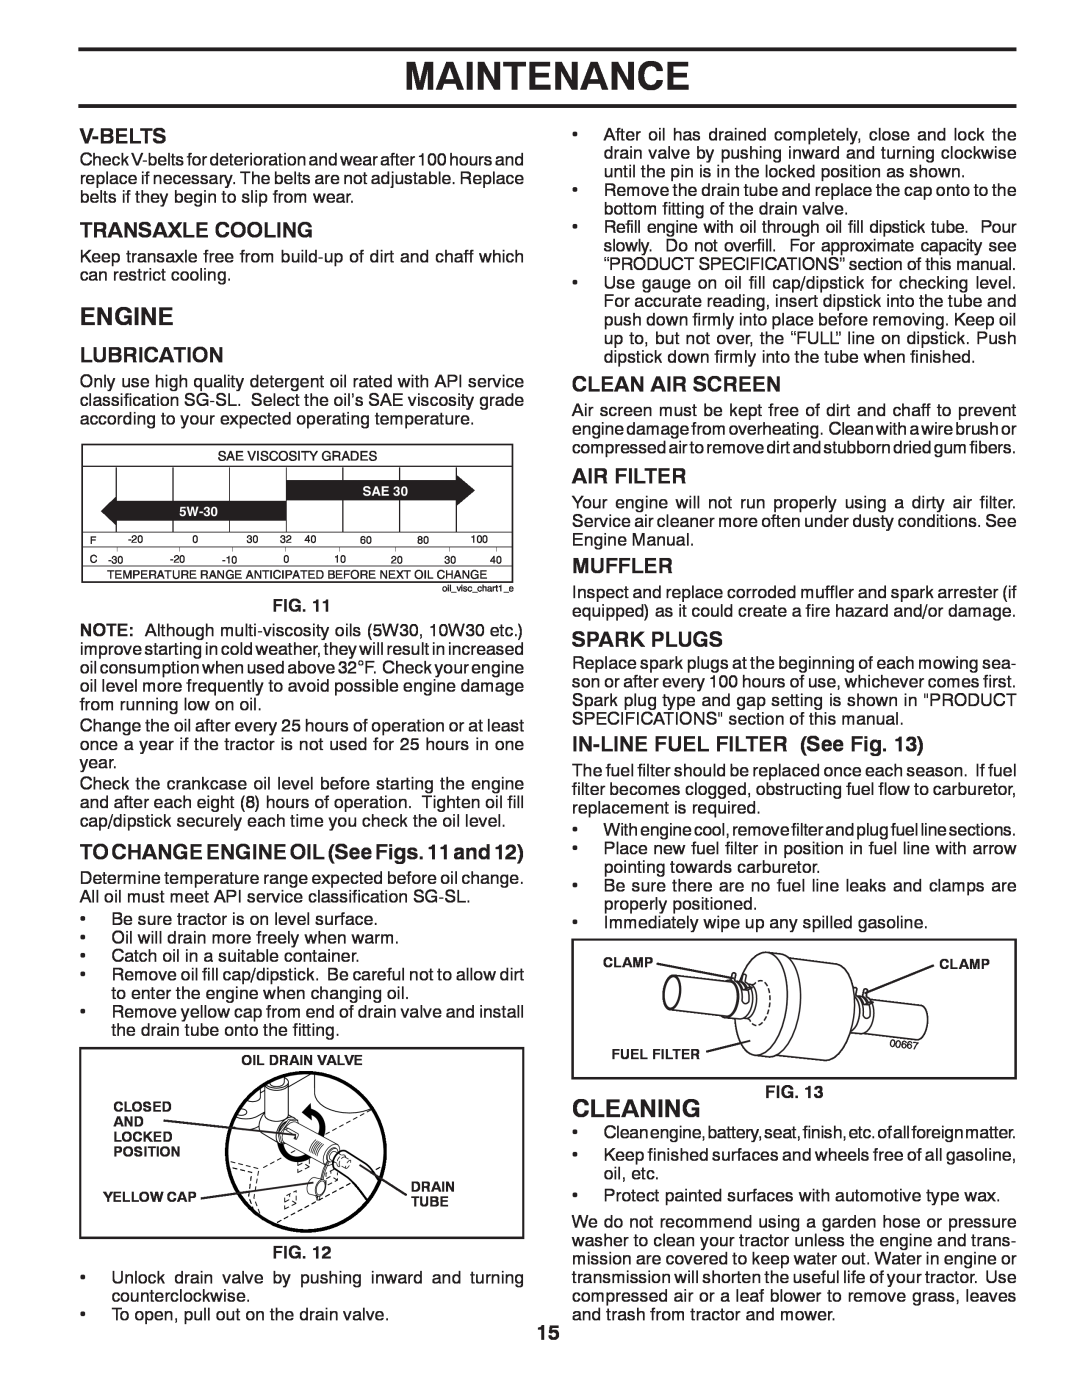 Poulan 424008 Engine, Cleaning, V-Belts, Transaxle Cooling, Lubrication, TO CHANGE ENGINE OIL See Figs. 11 and, Air Filter 